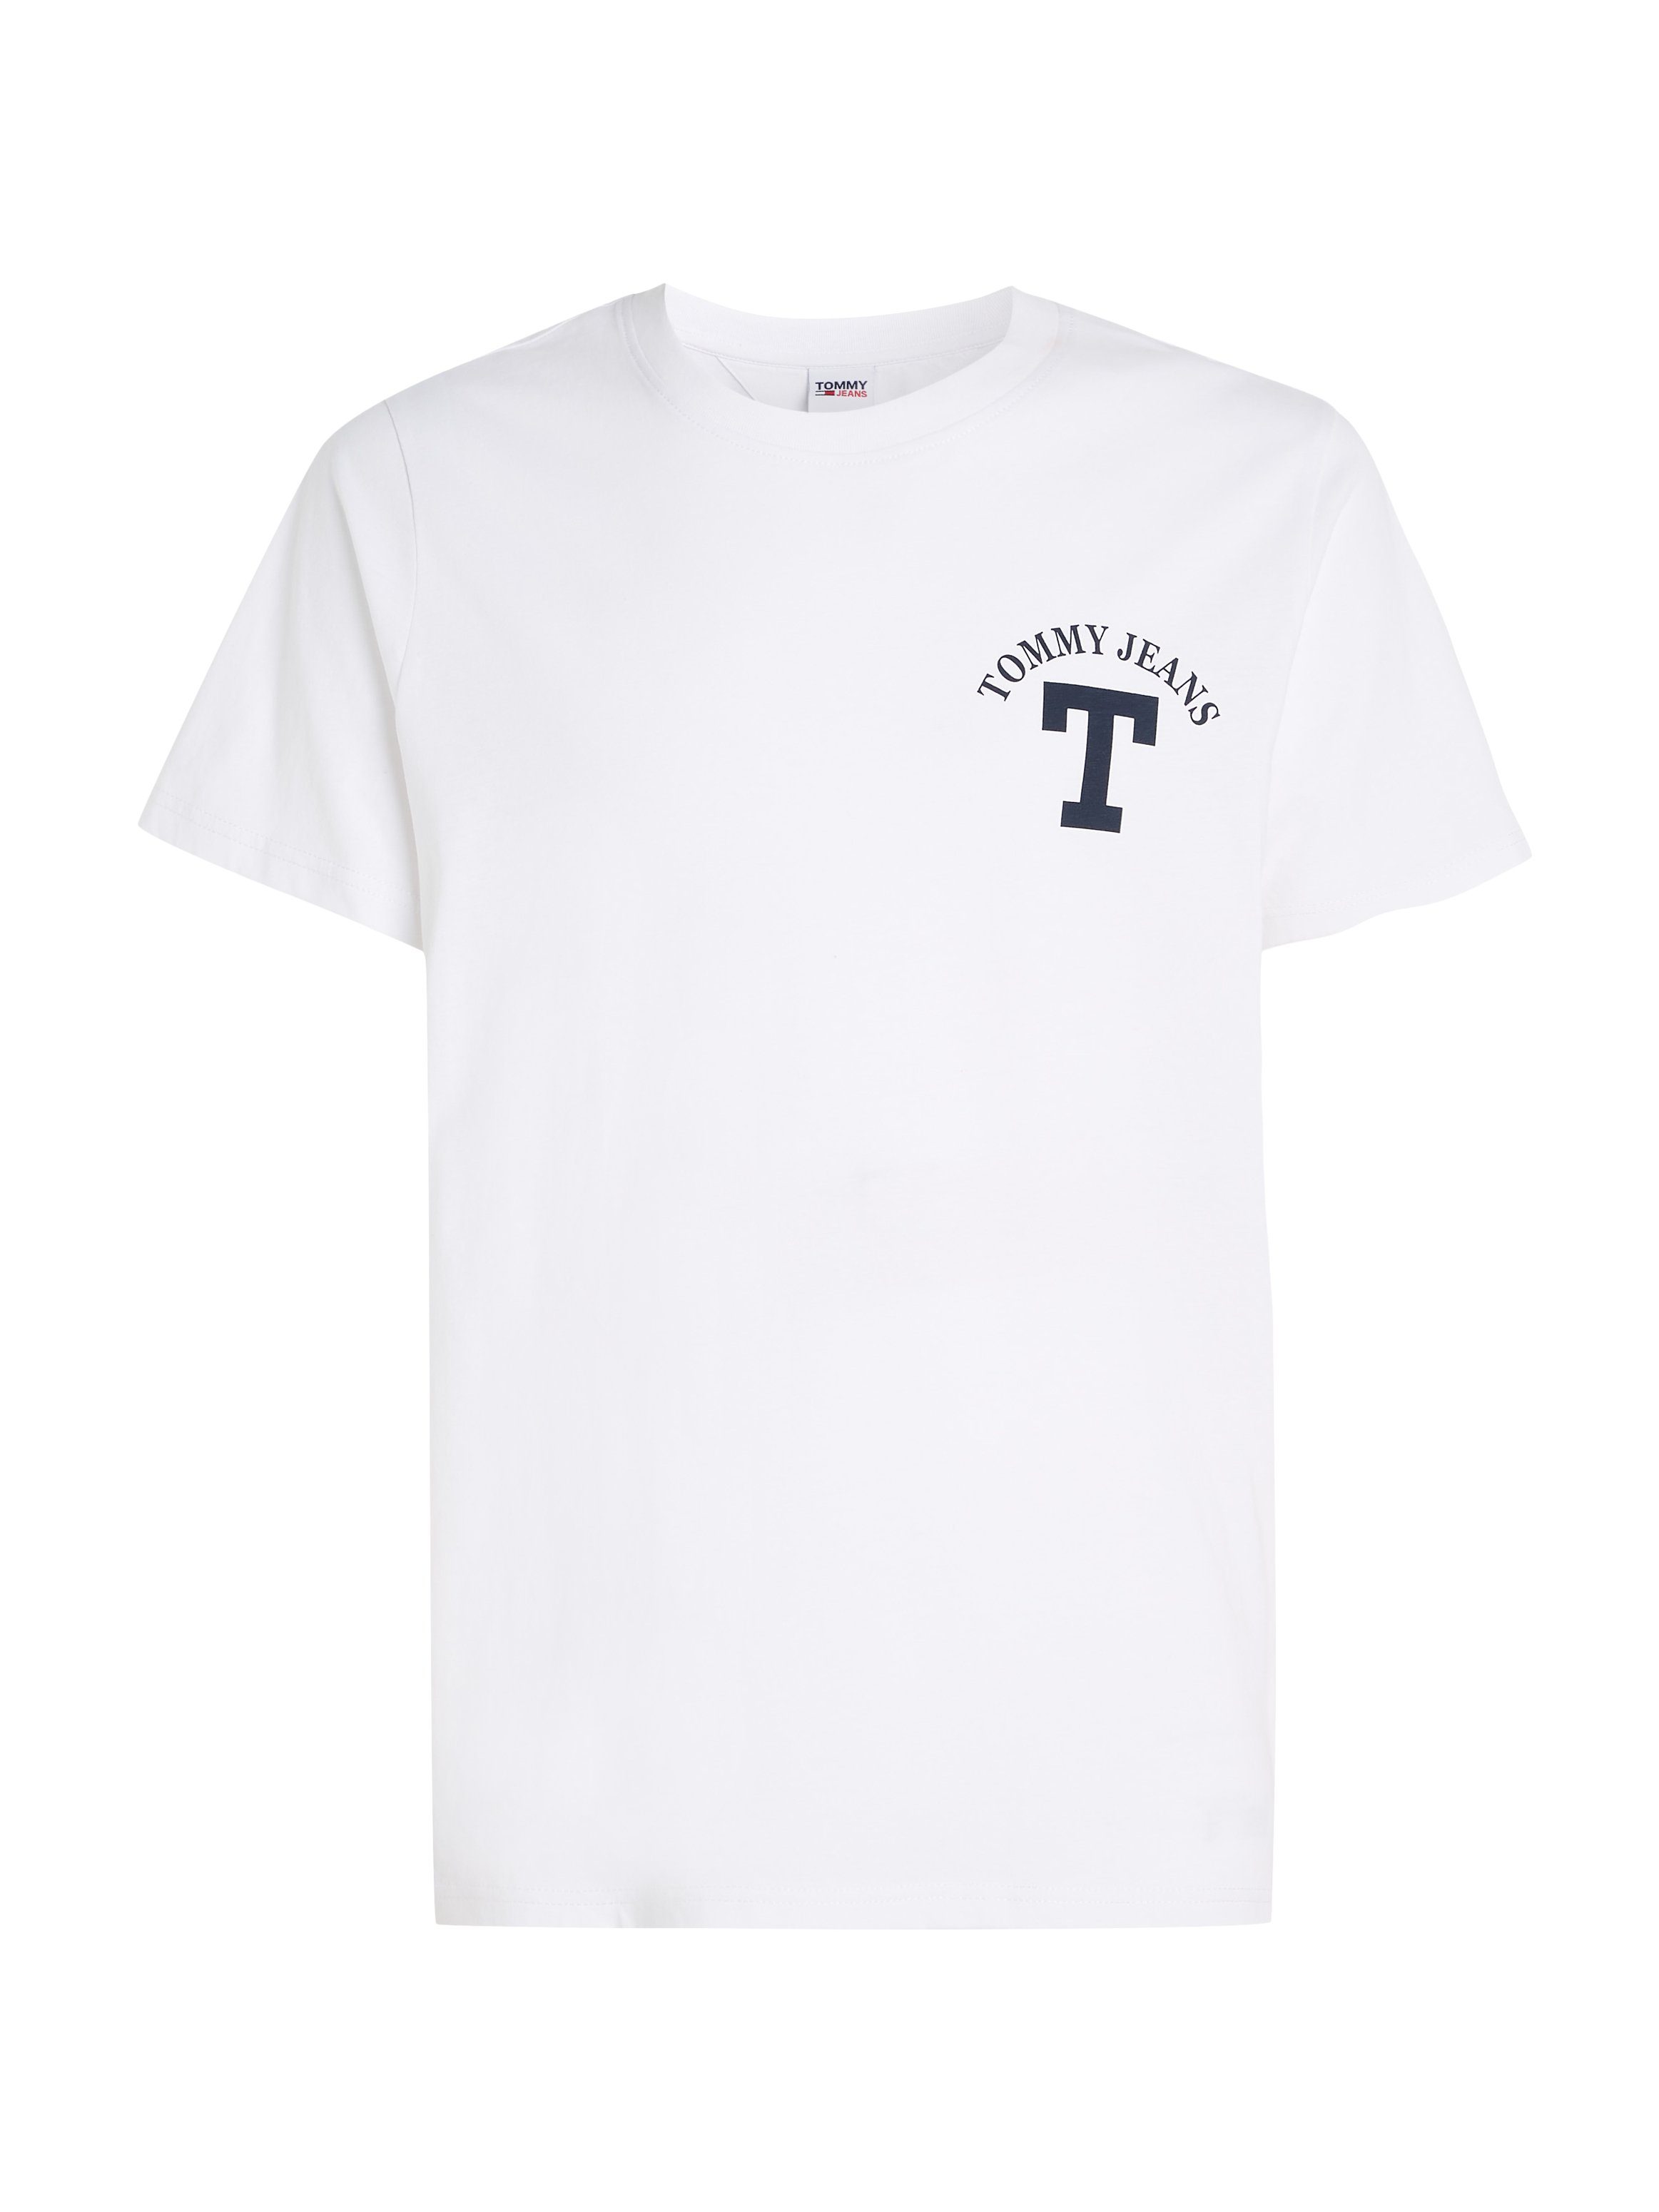 Jeans CURVED LETTERMAN White Tommy T-Shirt REG TJM TEE